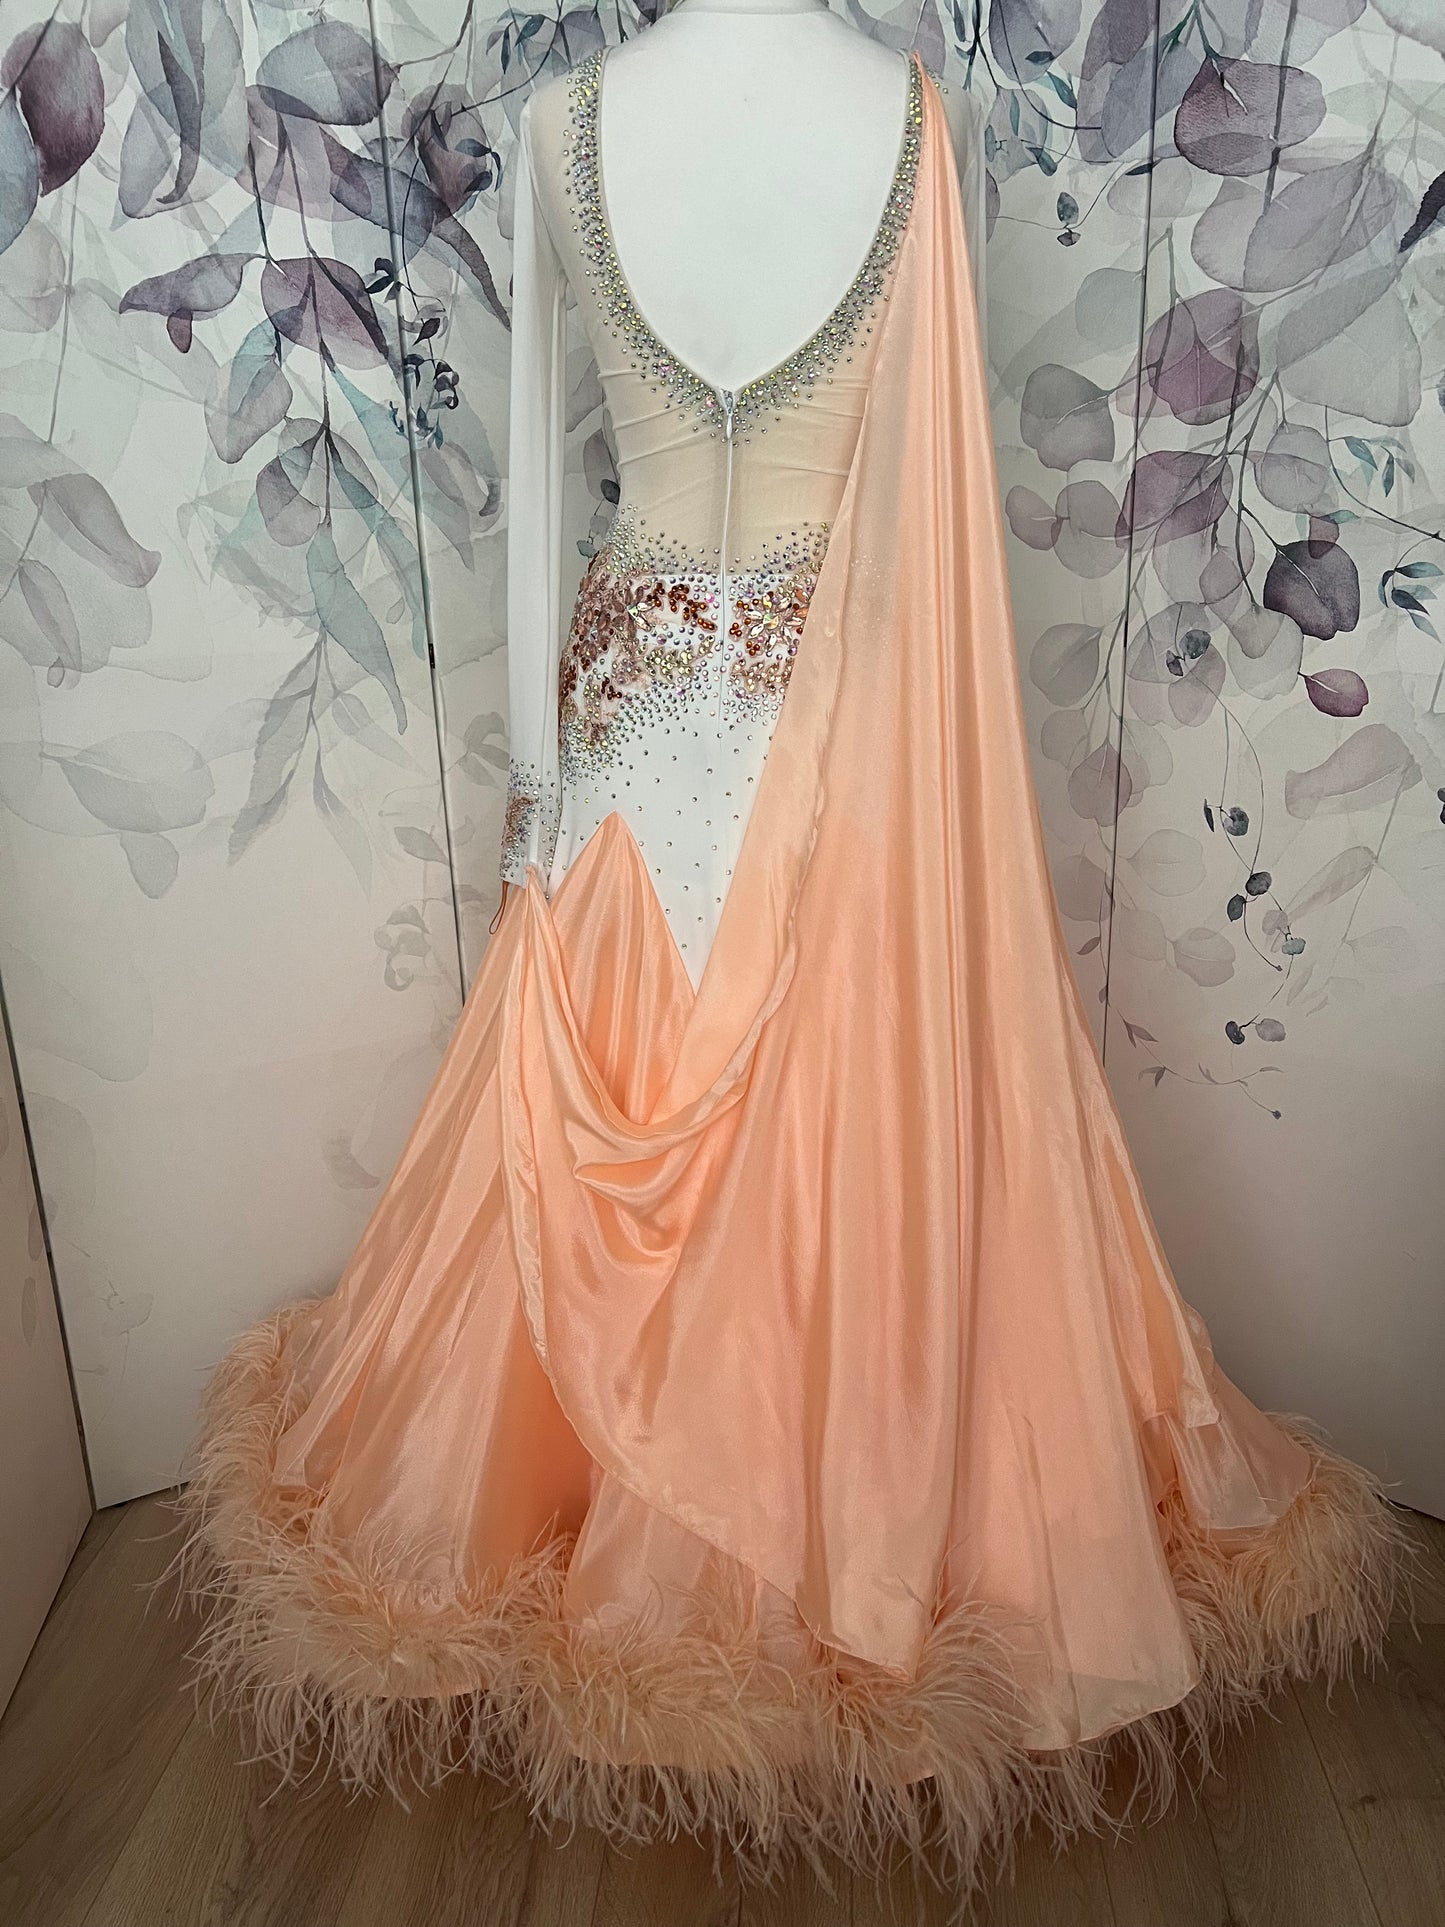 227 Peach & White Ballroom Dress with peach ostrich feather boa attached to the hem. Stoned in light peach, AB & Topaz. Detachable Float detail to the right back shoulder to left sleeve